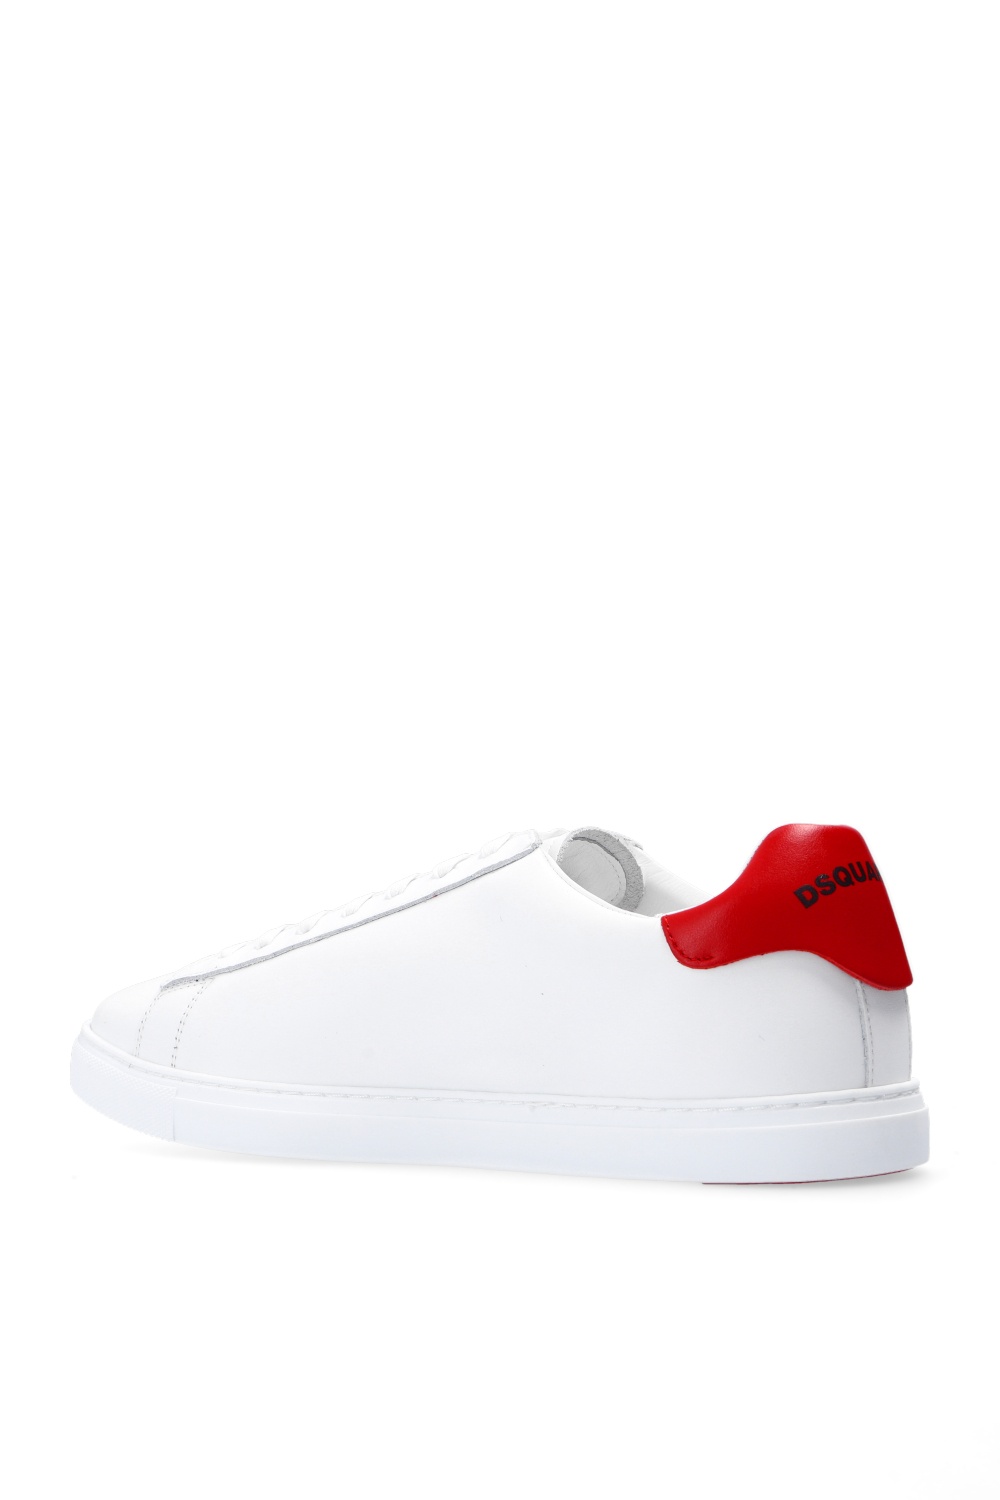 Dsquared2 Branded sneakers